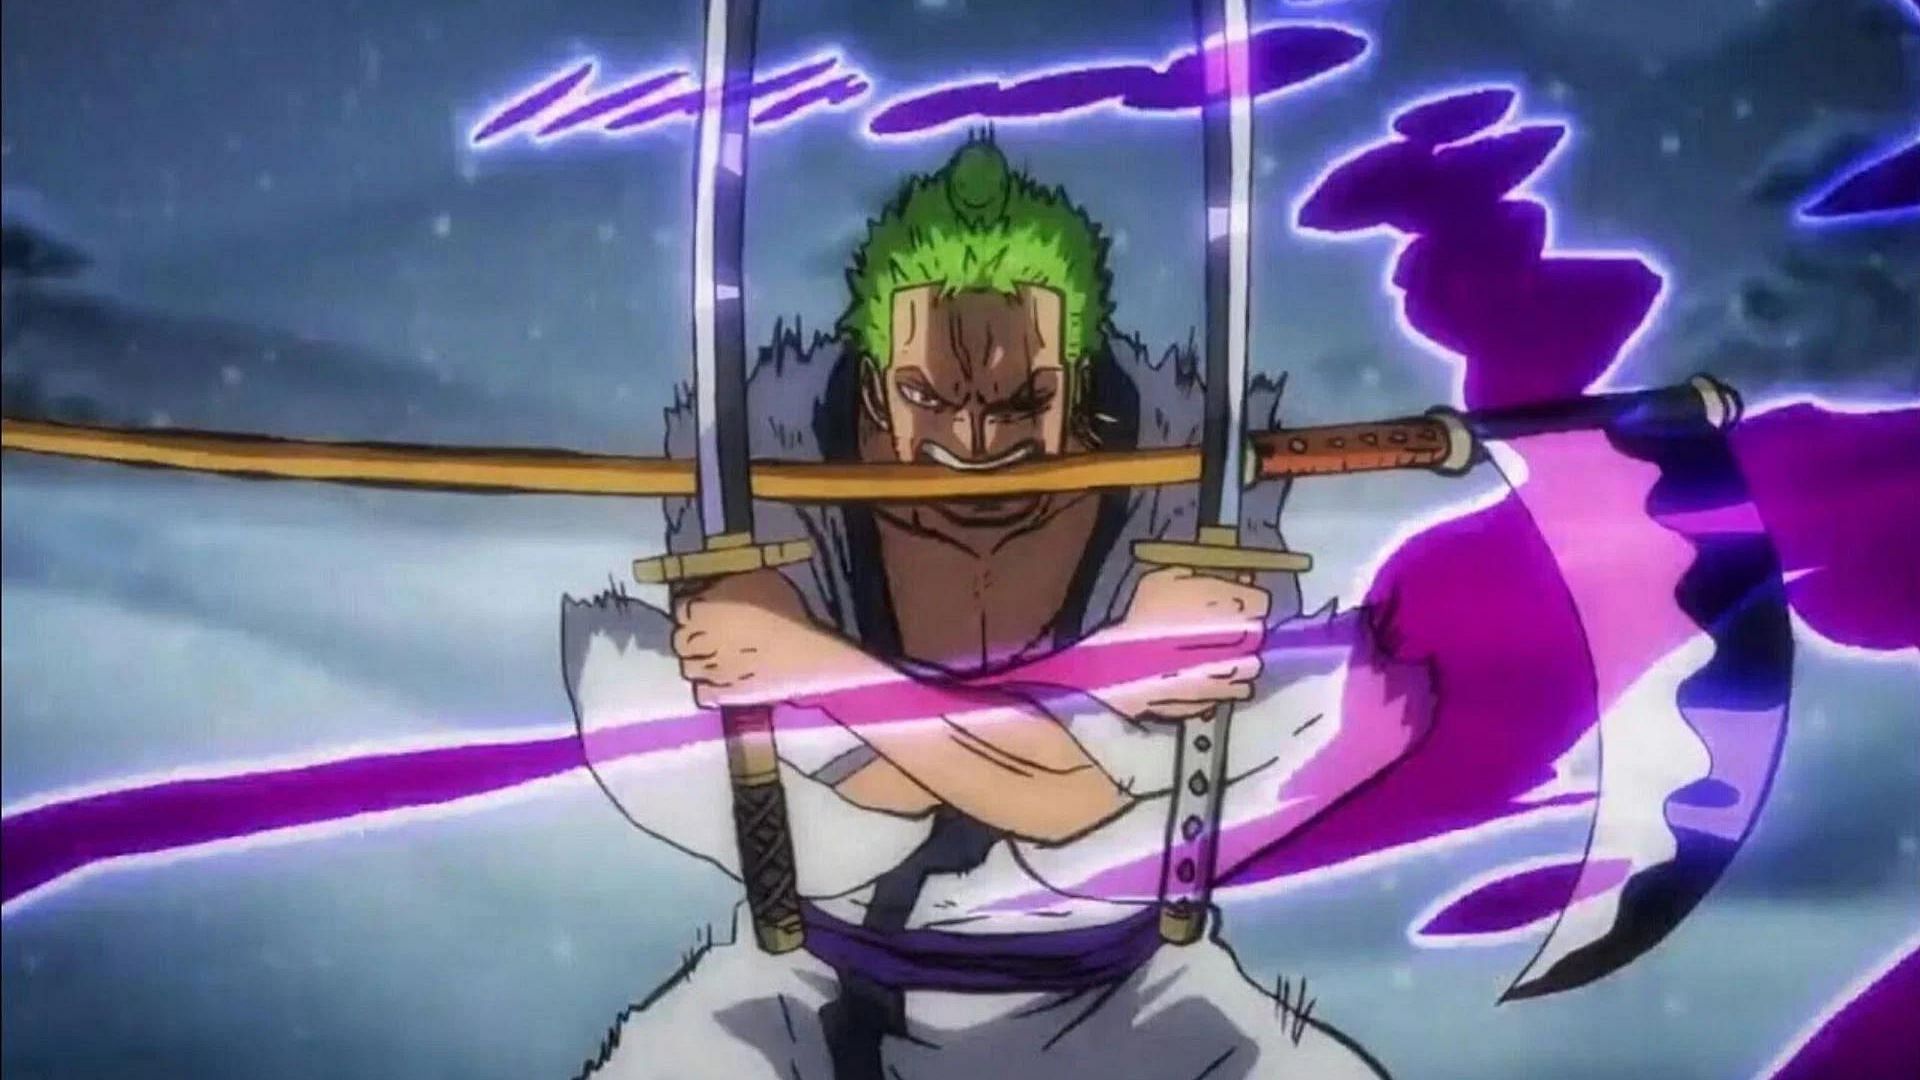 10 strongest attacks from Roronoa Zoro in One Piece, ranked (Image via Toei Animation)